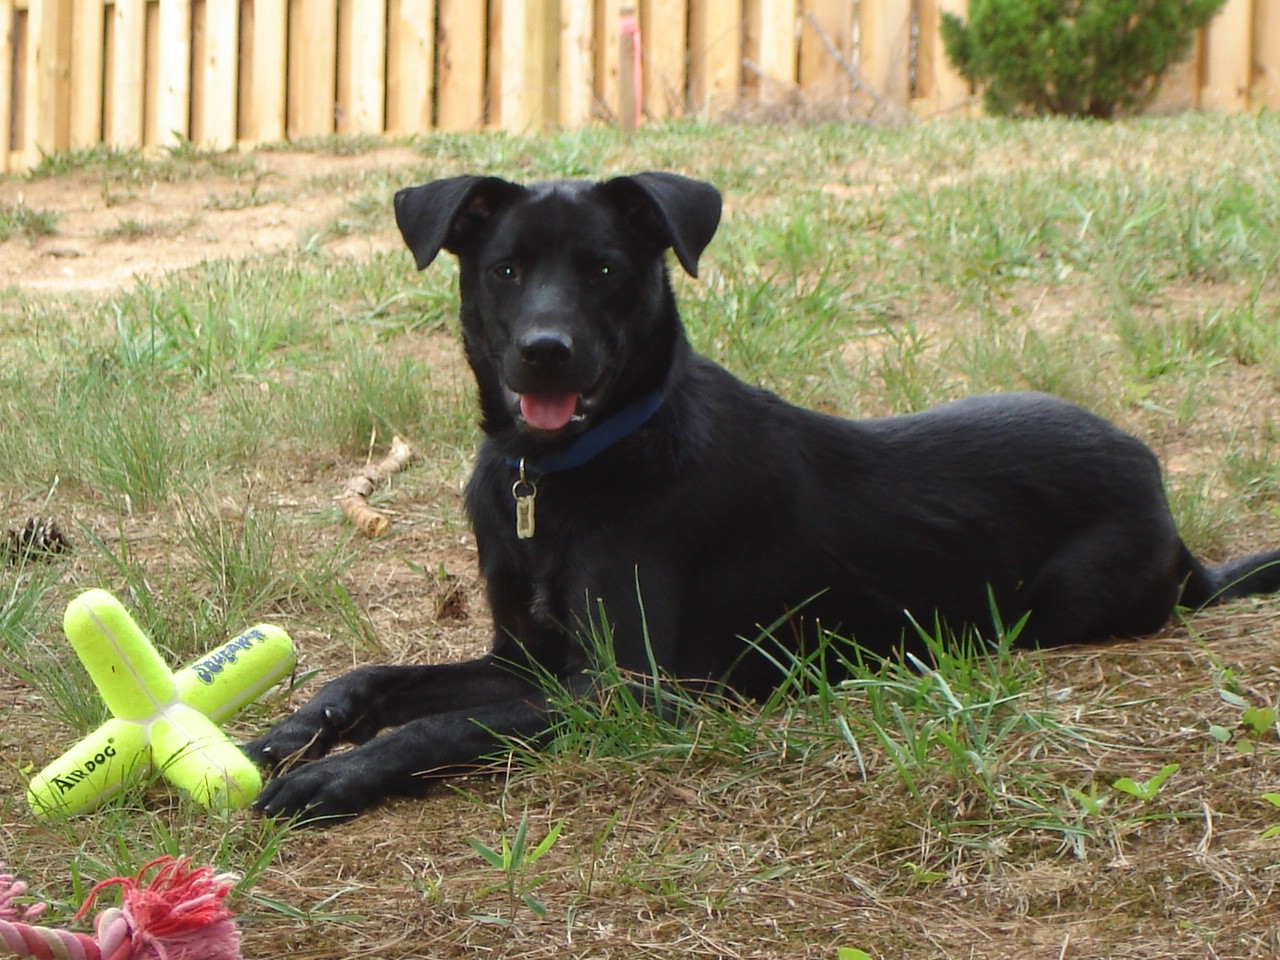 [Reilly+with+toy.jpg]